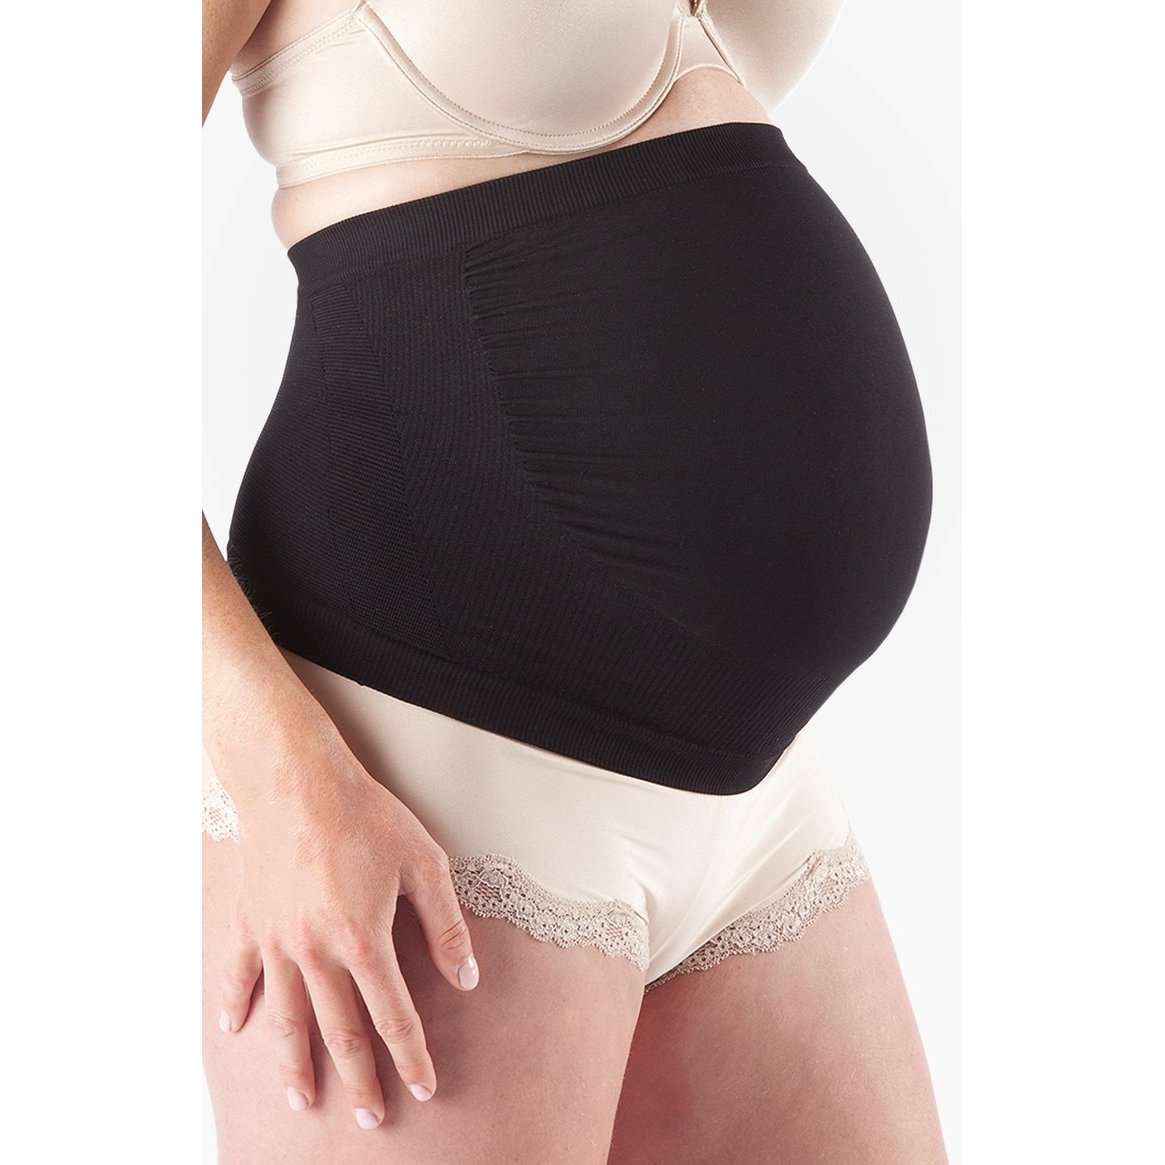 Belly Bandit Belly Boost Size XL Nude Support Belt